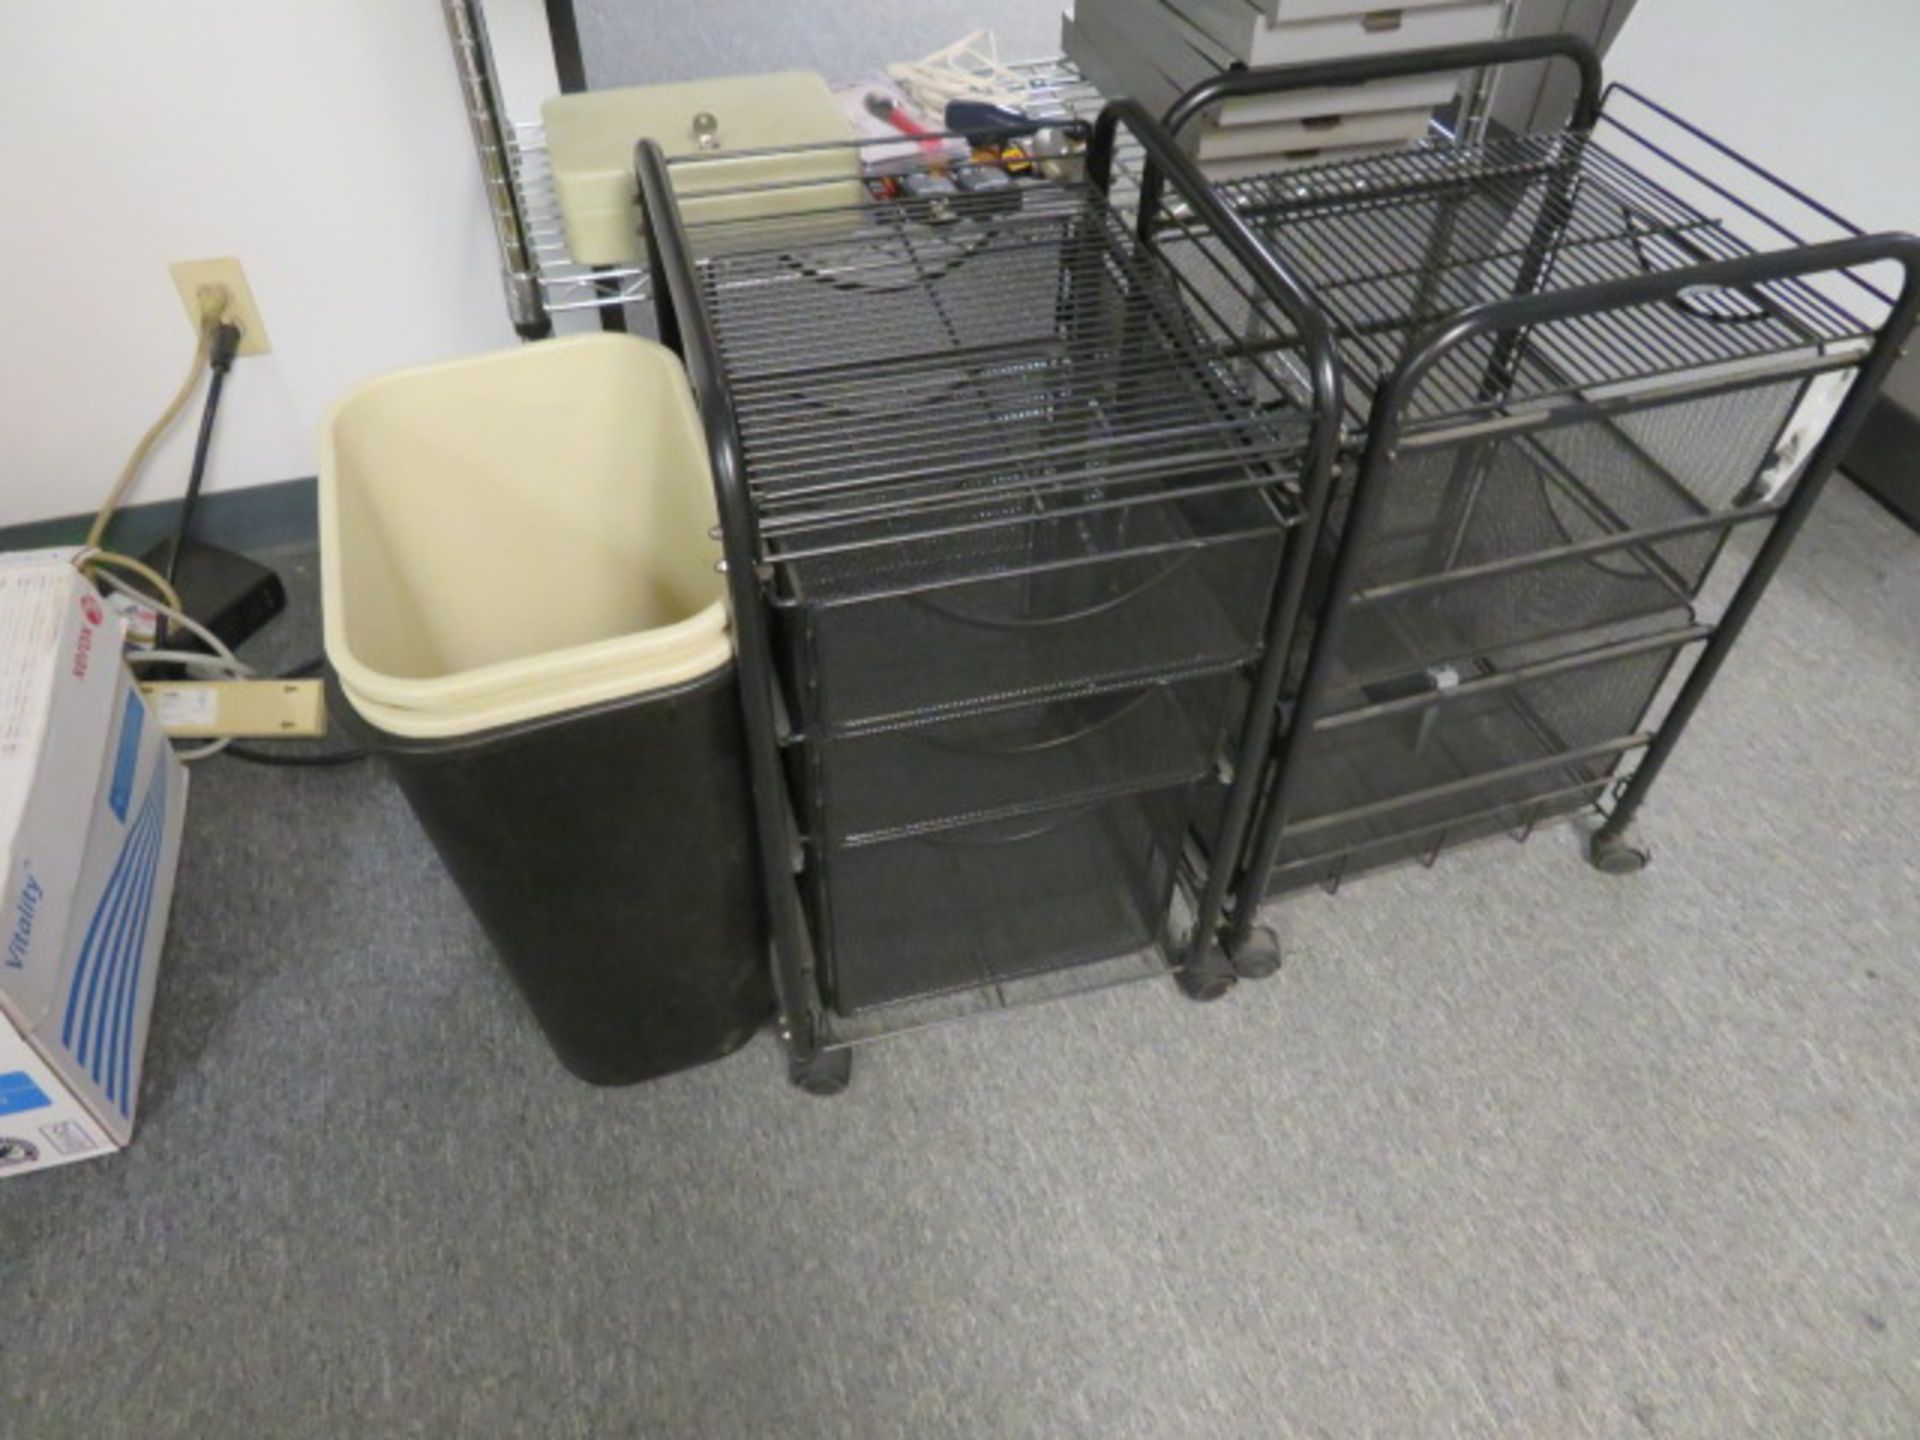 LOT CONSISTING OF: 4-shelf storage rack, (2) rolling wire file storage units, (3) trash cans, - Image 5 of 6